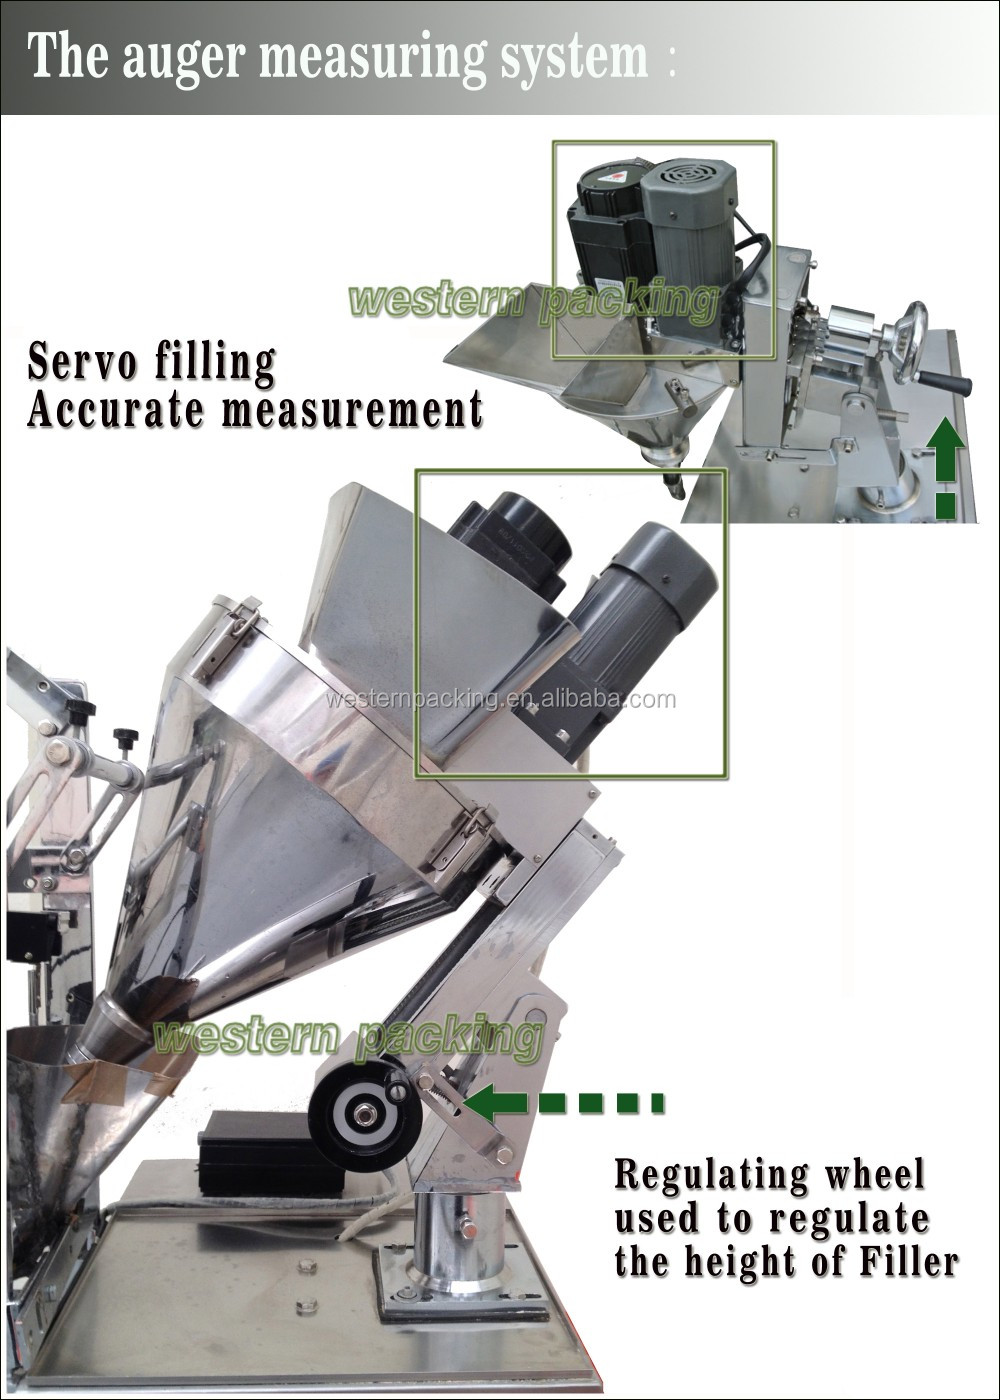 small sachets filling machine for powder